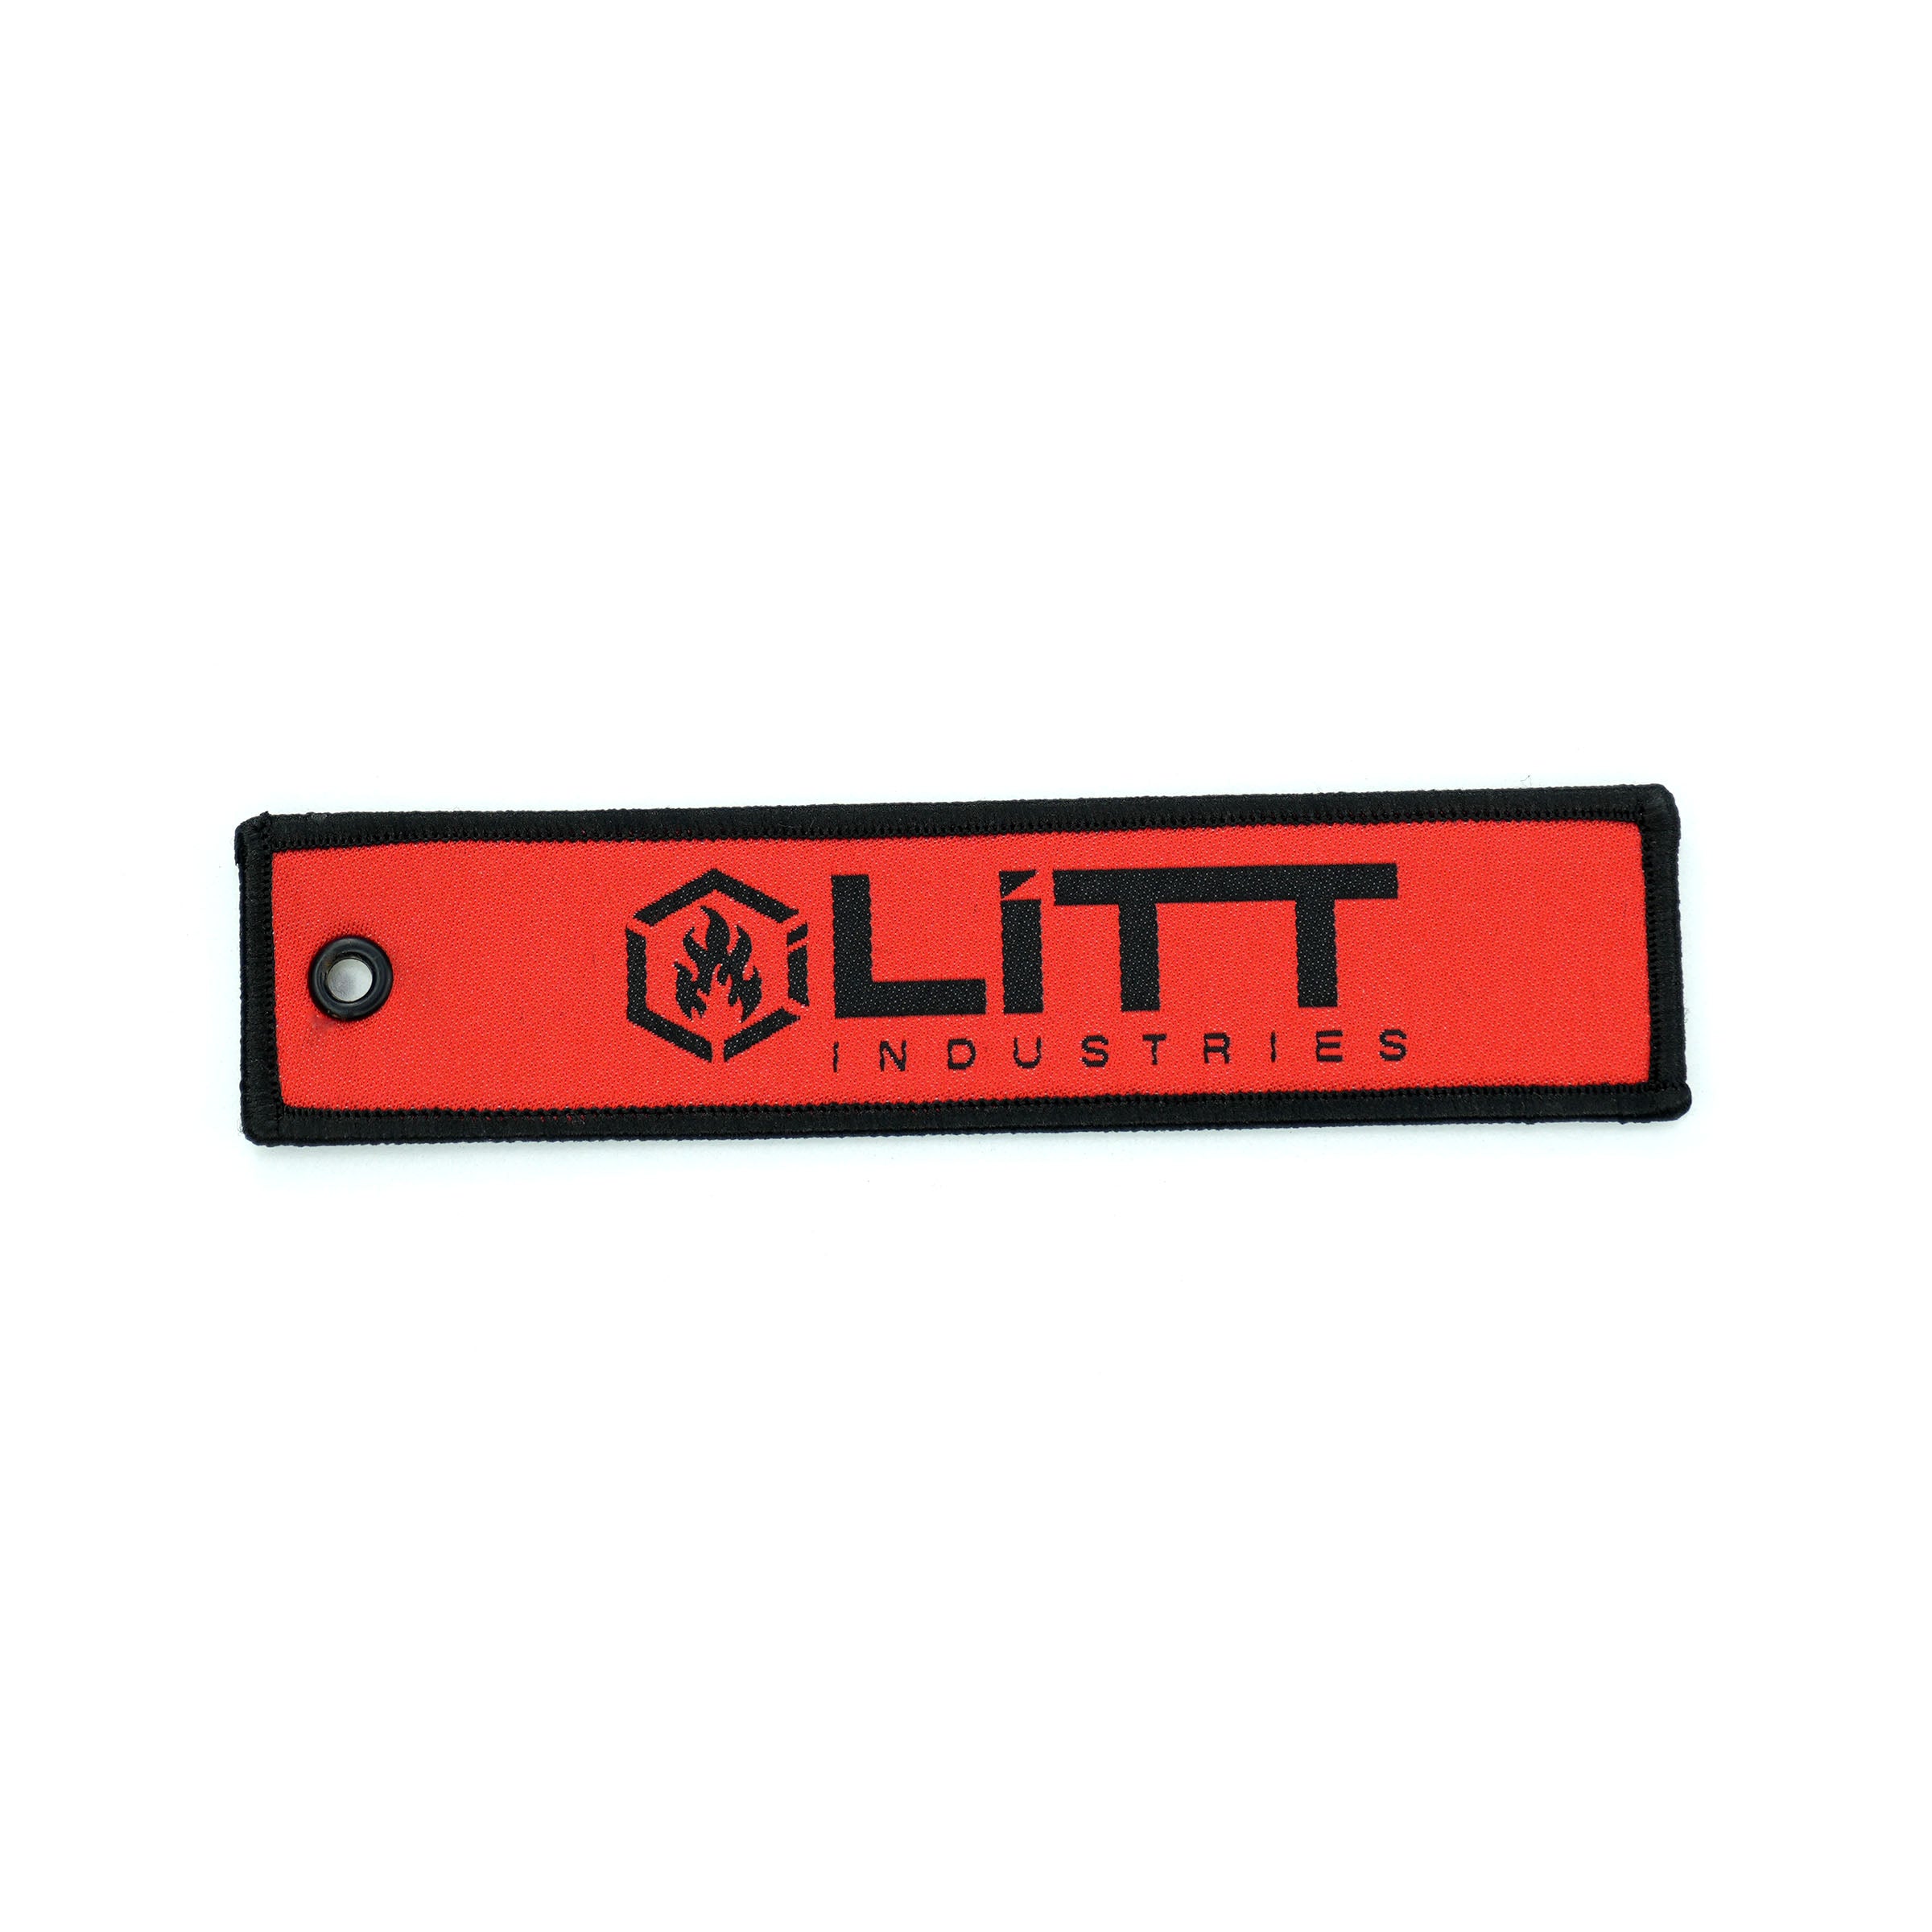 Litt Industries red keychain braap funny durable strong the best keychain on the market 